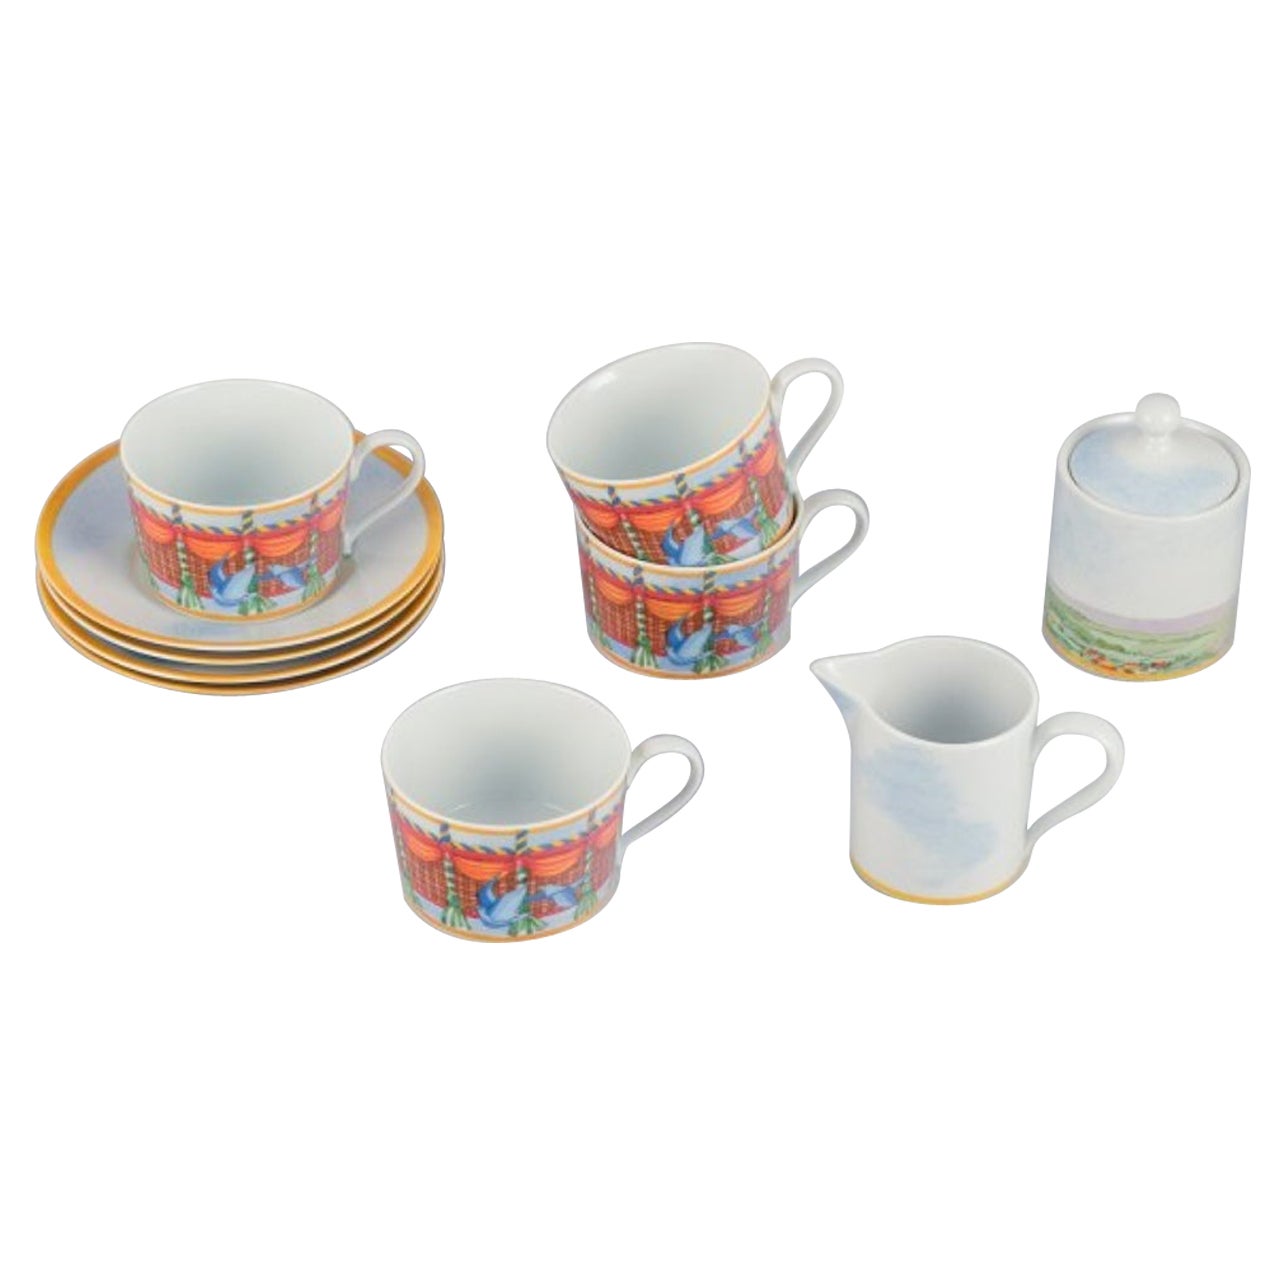 Williams-Sonoma Fine Porcelain. Montgolfiére coffee set for four people. For Sale